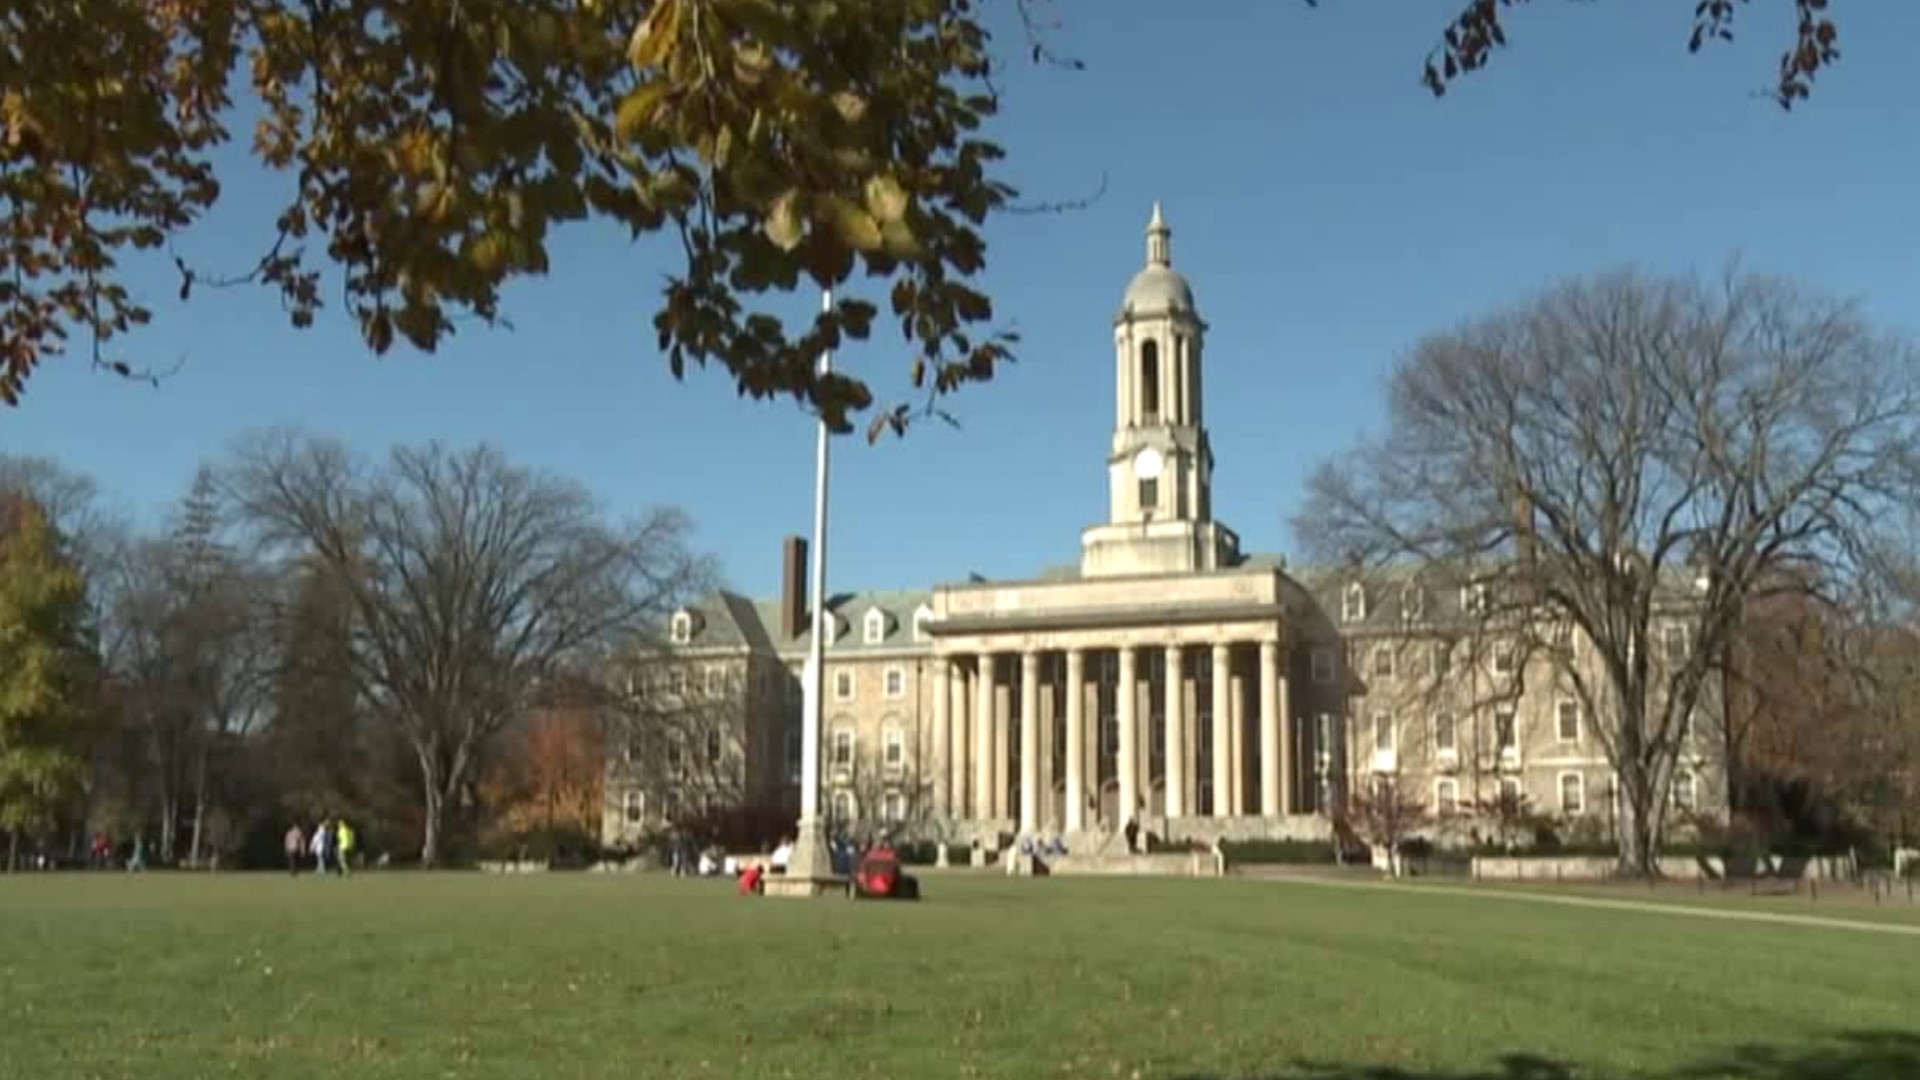 Just before 5:30 p.m., officials say there is no longer a threat to the University community.